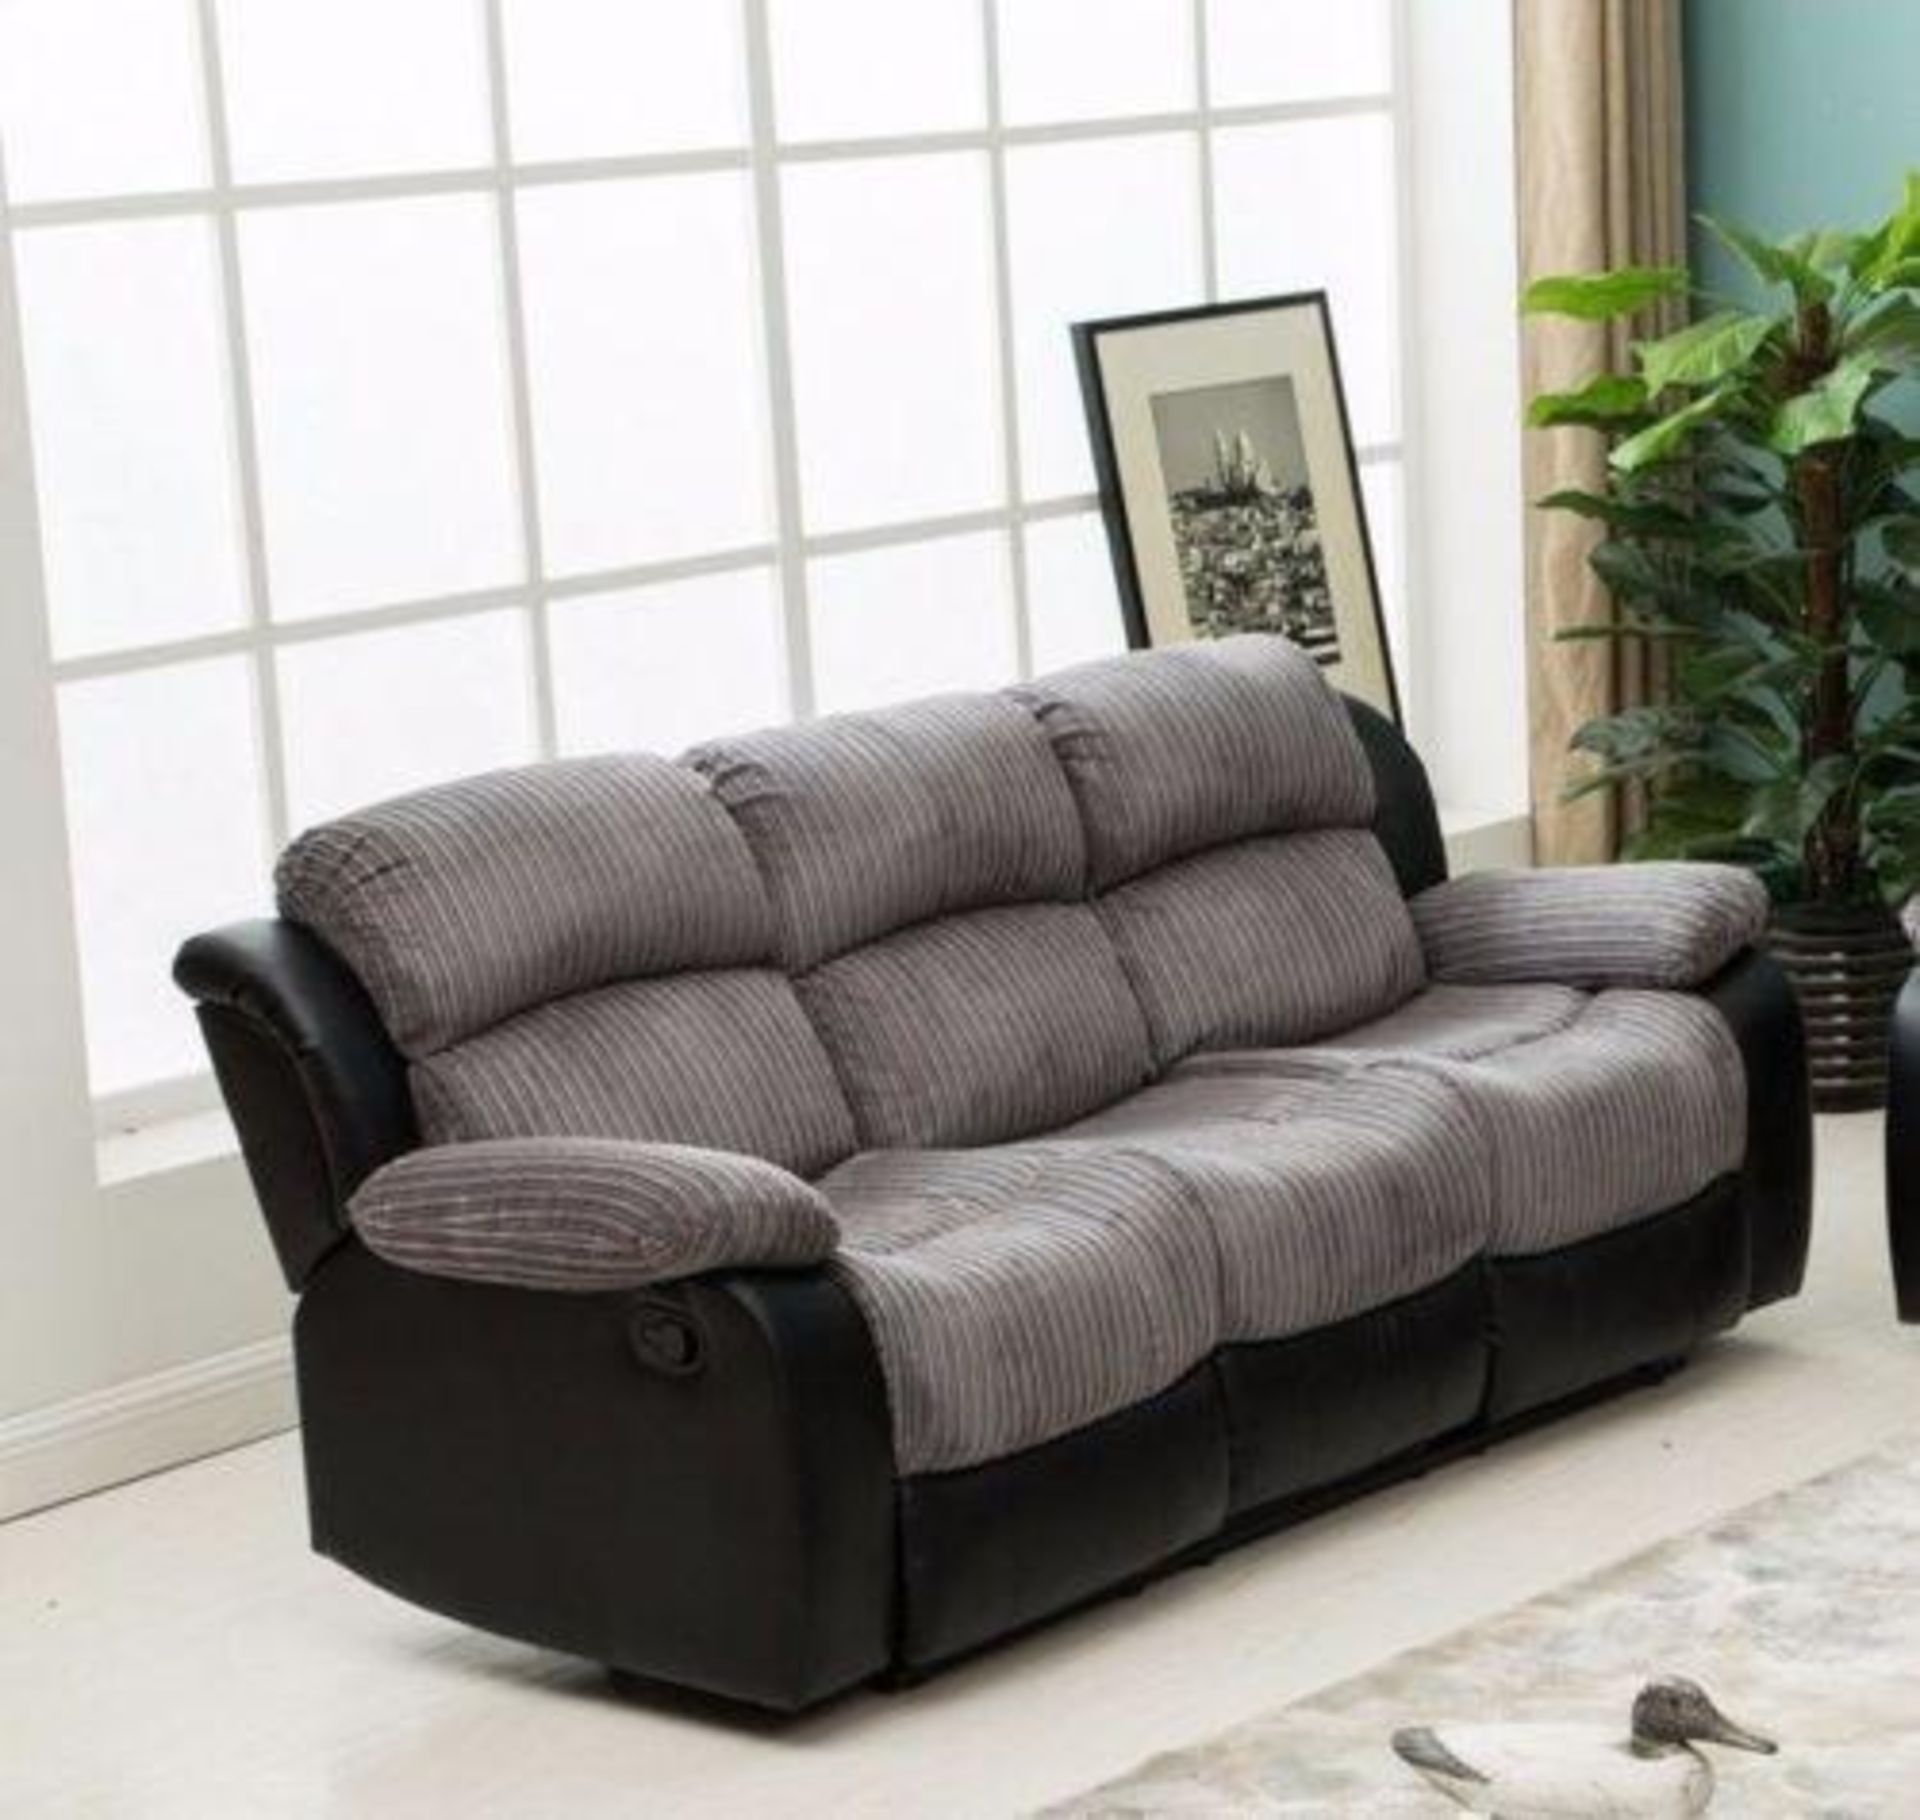 Brand new boxed 3 seater plus 2 seater california reclining sofas in black/grey fabric - Image 2 of 2